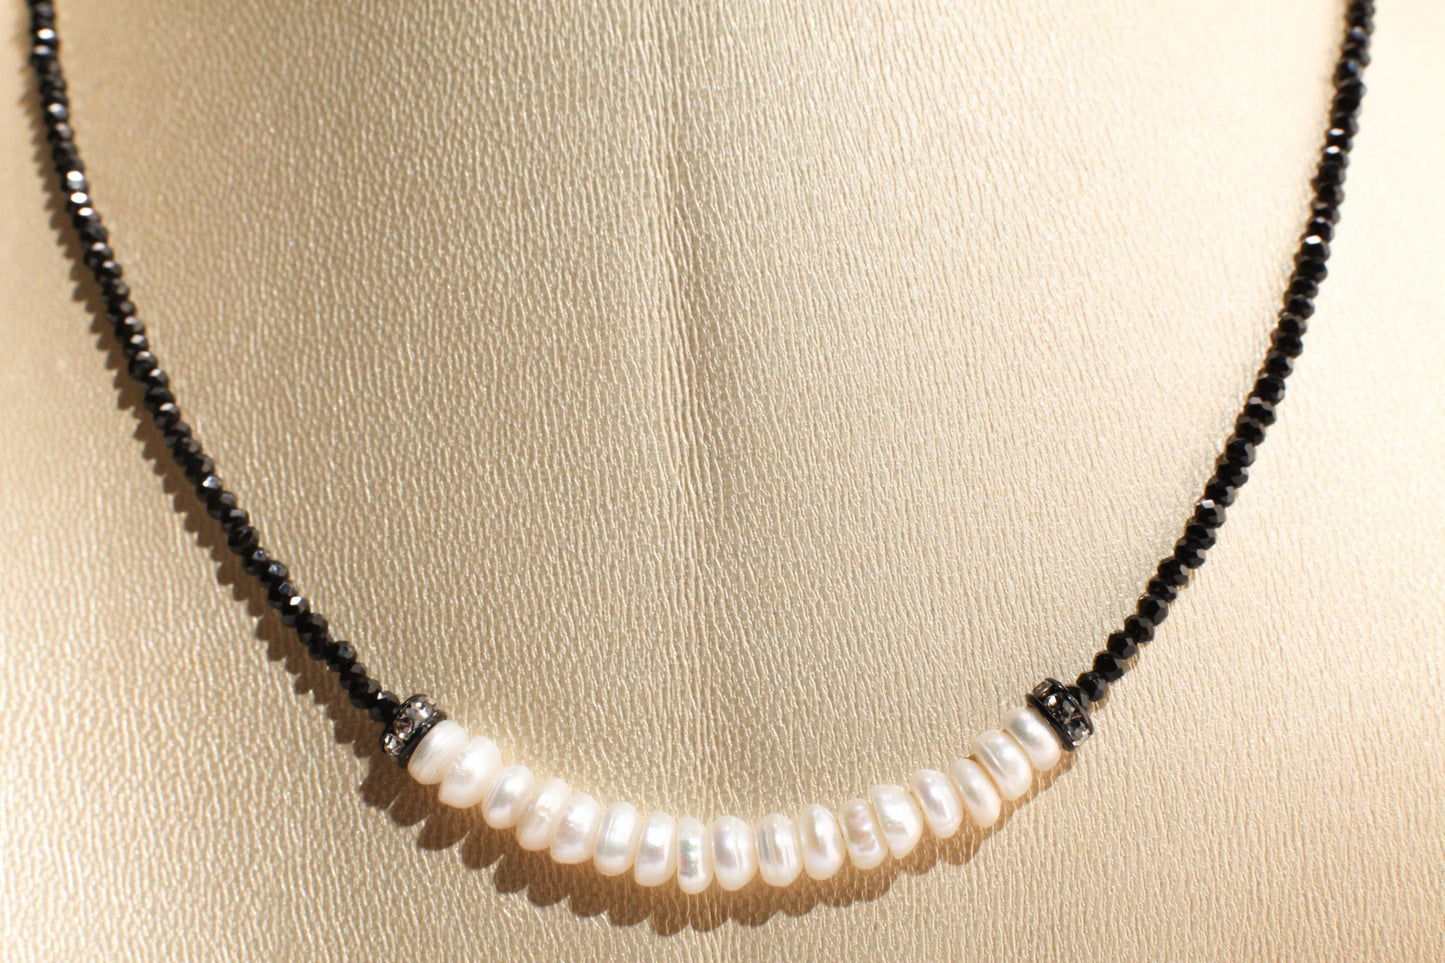 Black Spinel Micro Faceted 2mm Diamond Cut with Freshwater Pearl Rondelle Choker 925 Sterling Silver Necklace Minimalist,Necklace 14&quot; to 40&quot;